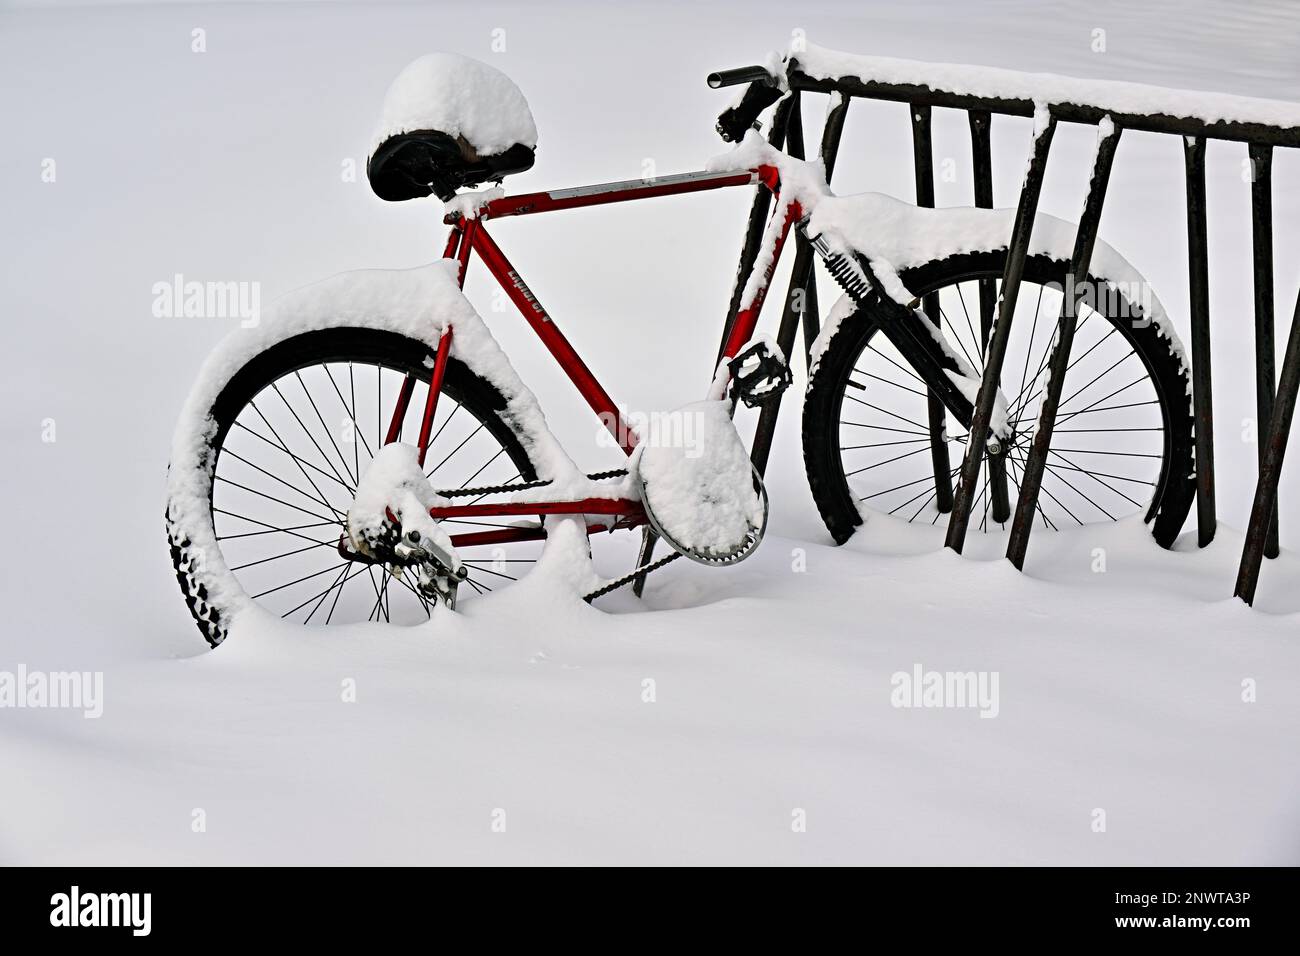 A mountain bicycle stored in a storage area covered with the fresh snow of winter in rural Alberta Canada. Stock Photo